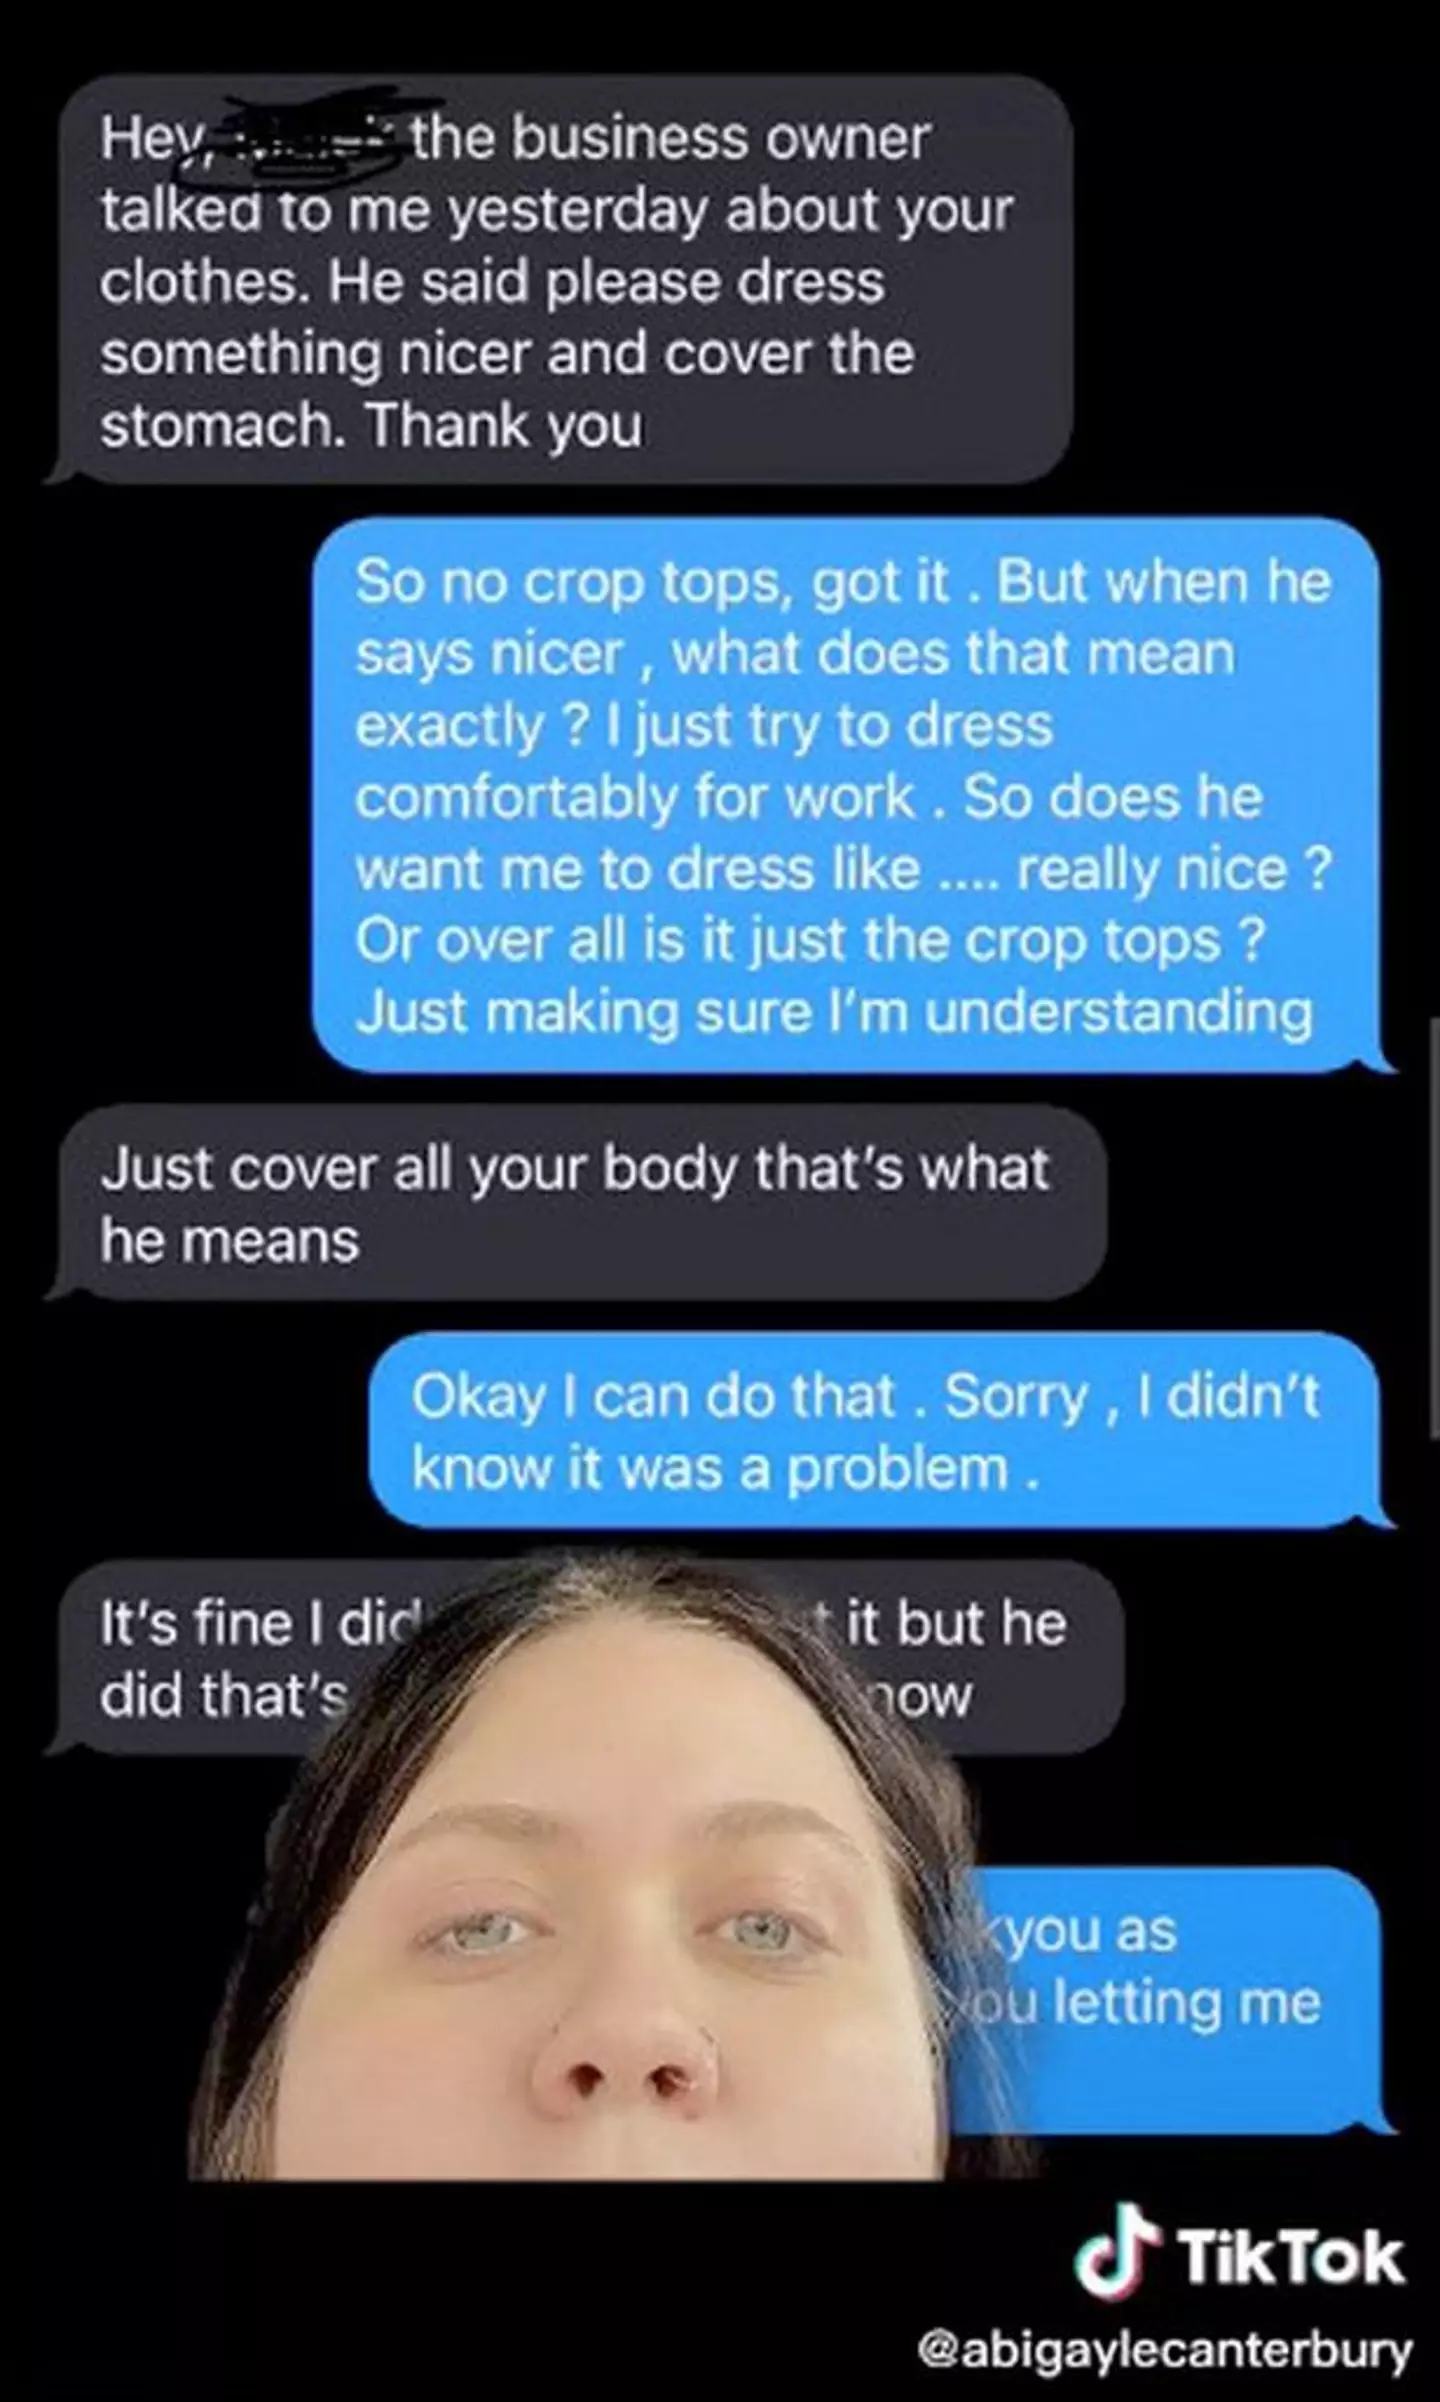 She shared part of the messages her manager sent her.